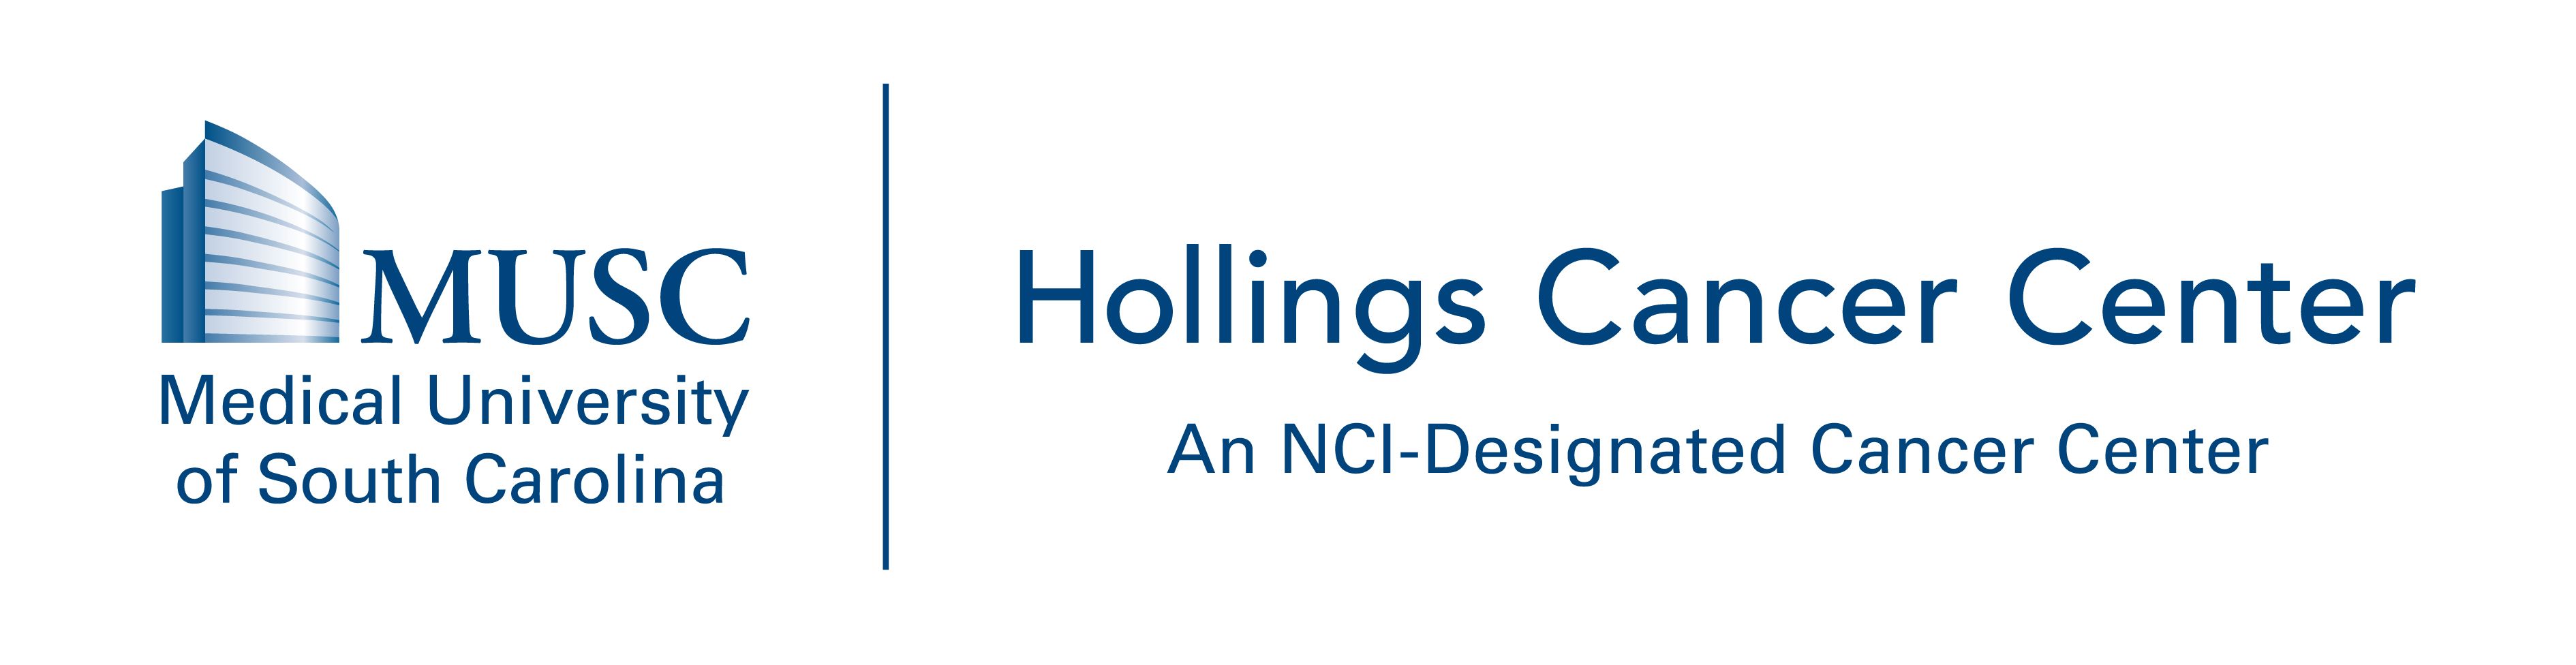 Institution Partners | Cancer Centers | <b>MUSC Hollings Cancer Center</b>